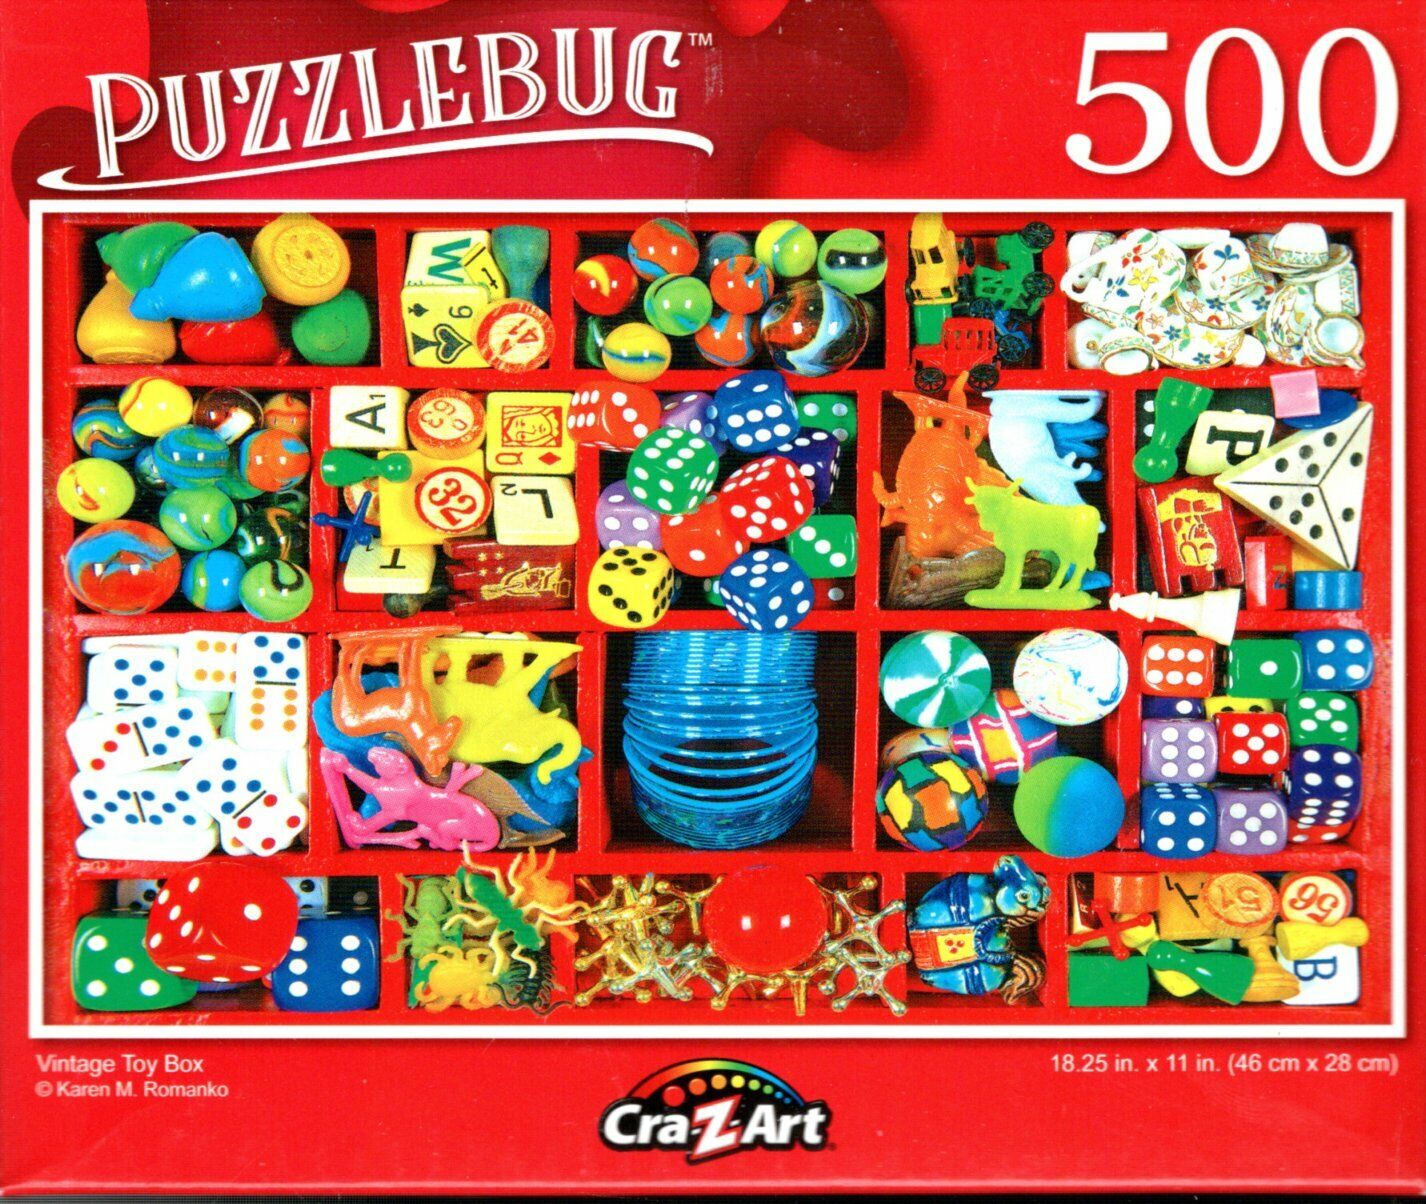 Vintage Toy Box - 500 Pieces Jigsaw Puzzle